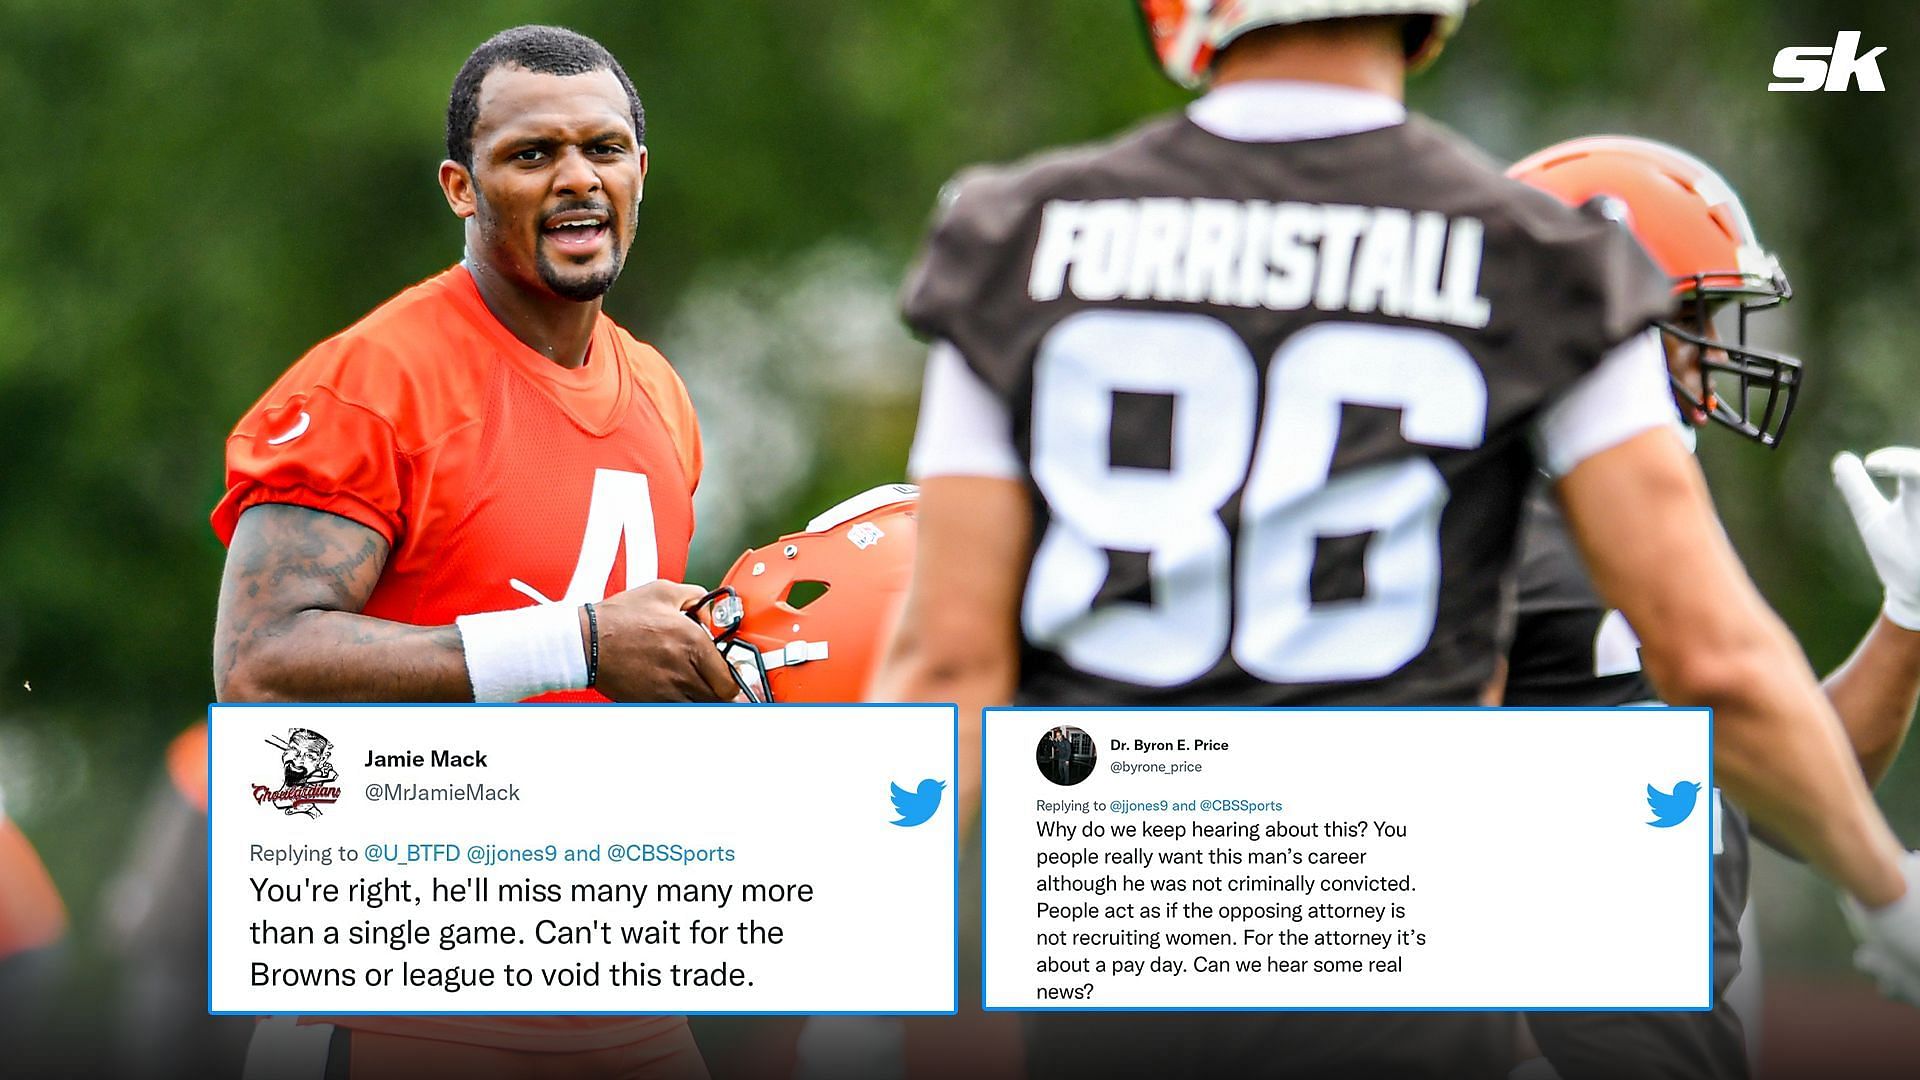 NFL fans react to news of 2 new civil lawsuits being filed against Deshaun Watson